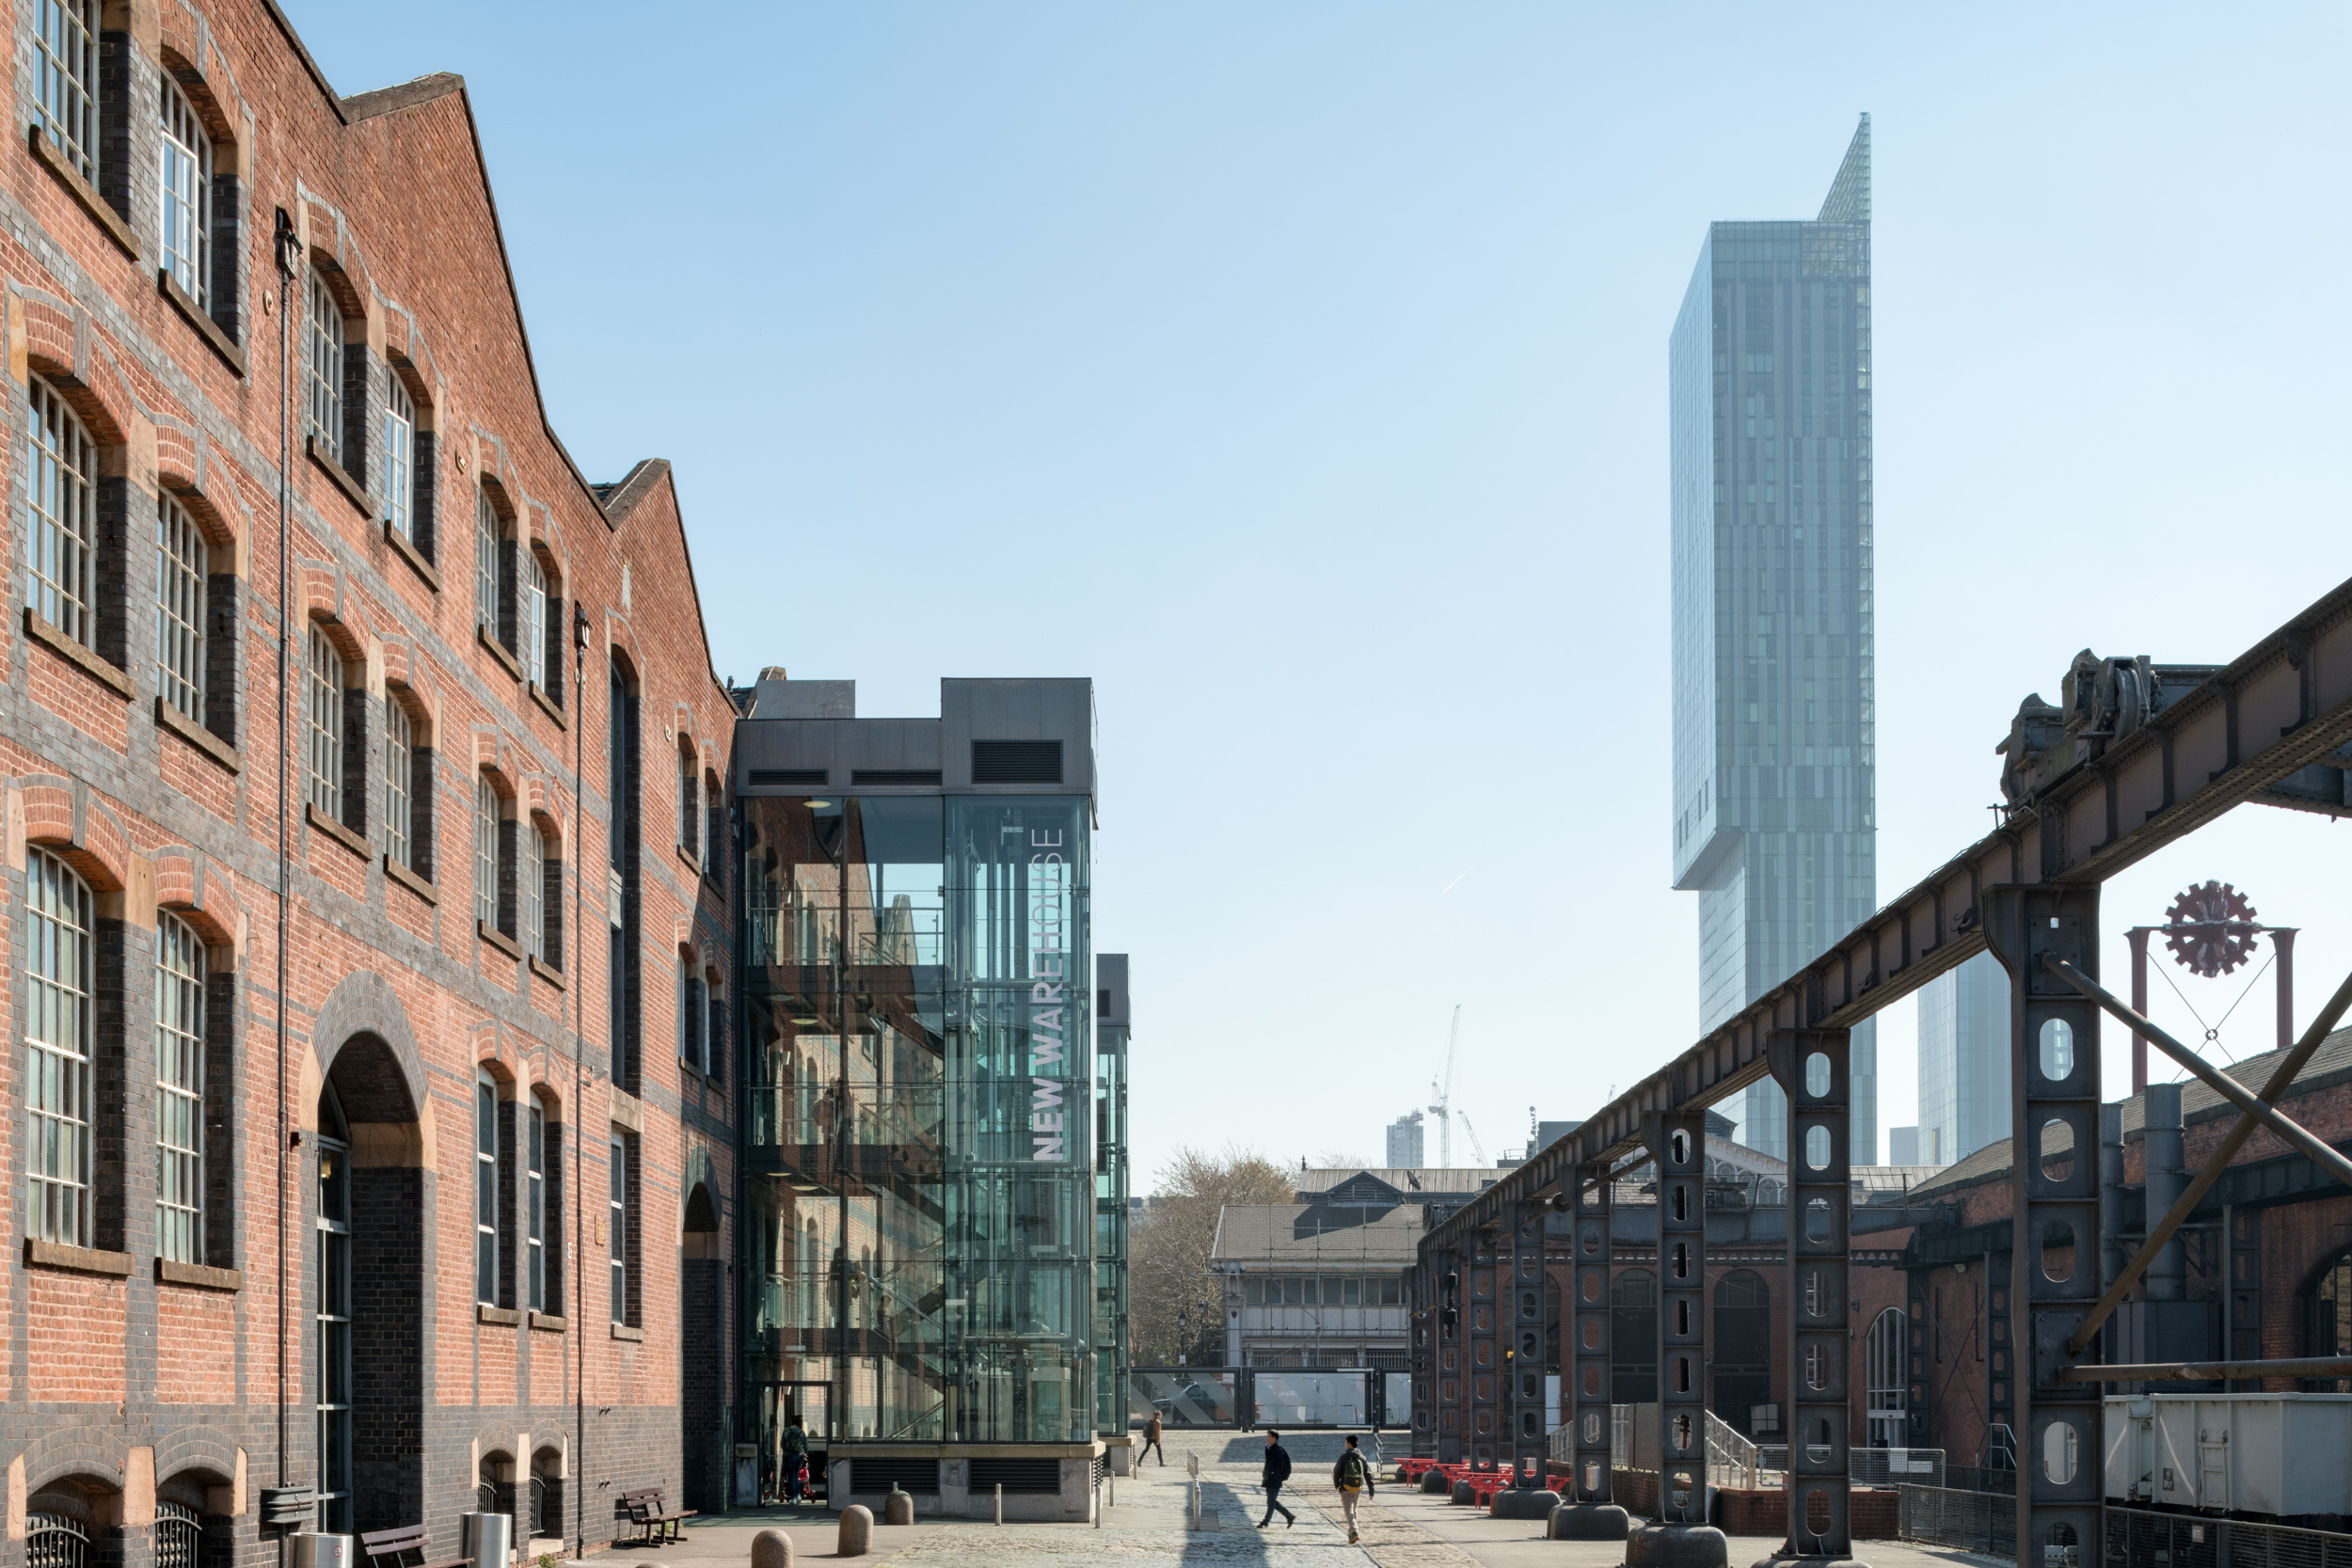 A view of the Upper Yard of the Science and Industry Museum. The large red brick building on the left is the New Warehouse, an industrial era warehouse with large paned windows and modern glass stairwells. The Beetham Tower glass skyscraper can be seen beyond the site to the right.